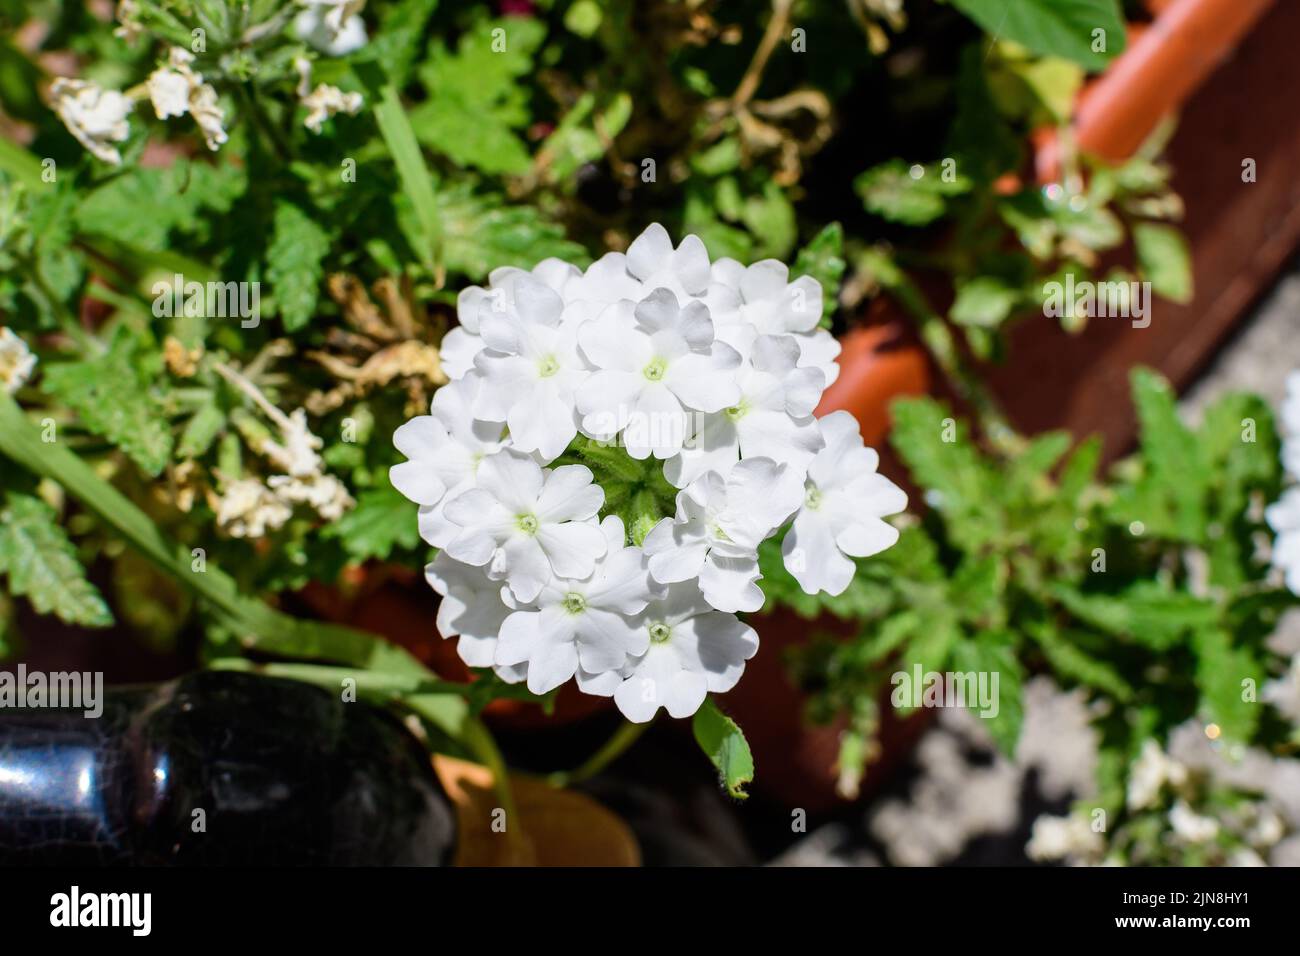 Delicate white flowers of Verbena Hybrida Nana Compacta plant in small garden pots displayed for sale at a market in a sunny summer day Stock Photo